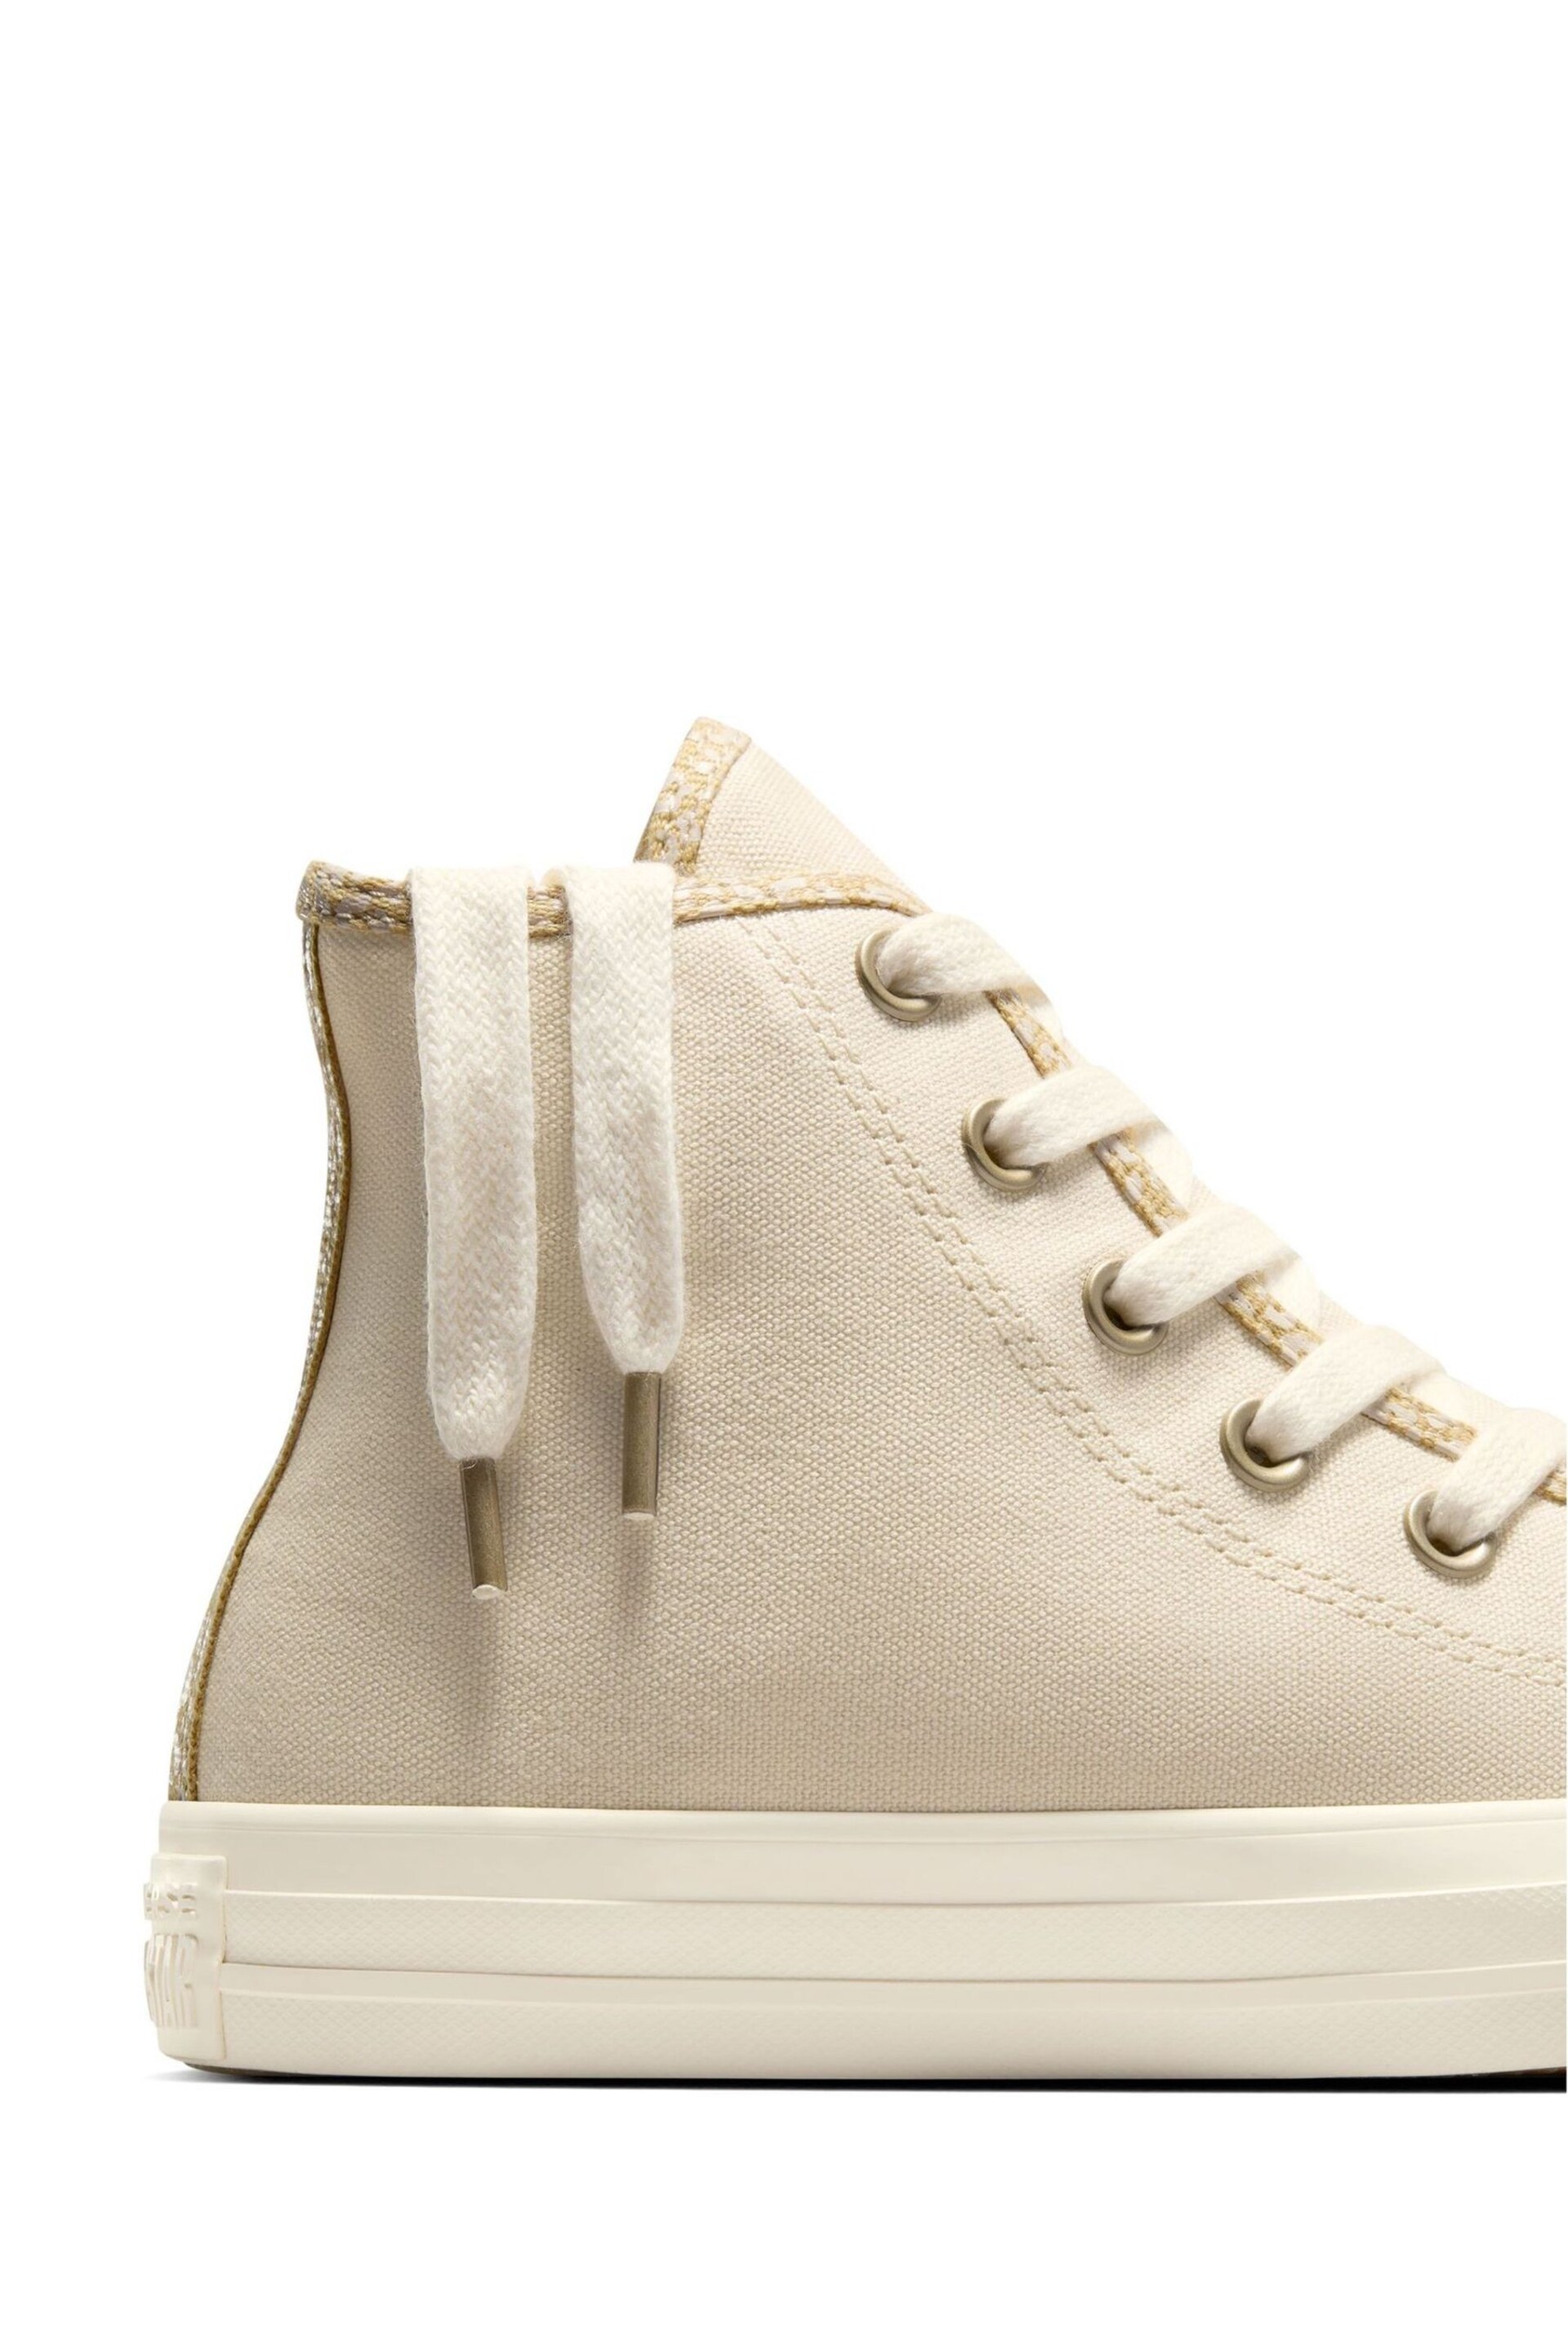 Converse Beige Chuck Taylor All Star High Top Trainers - Image 3 of 12